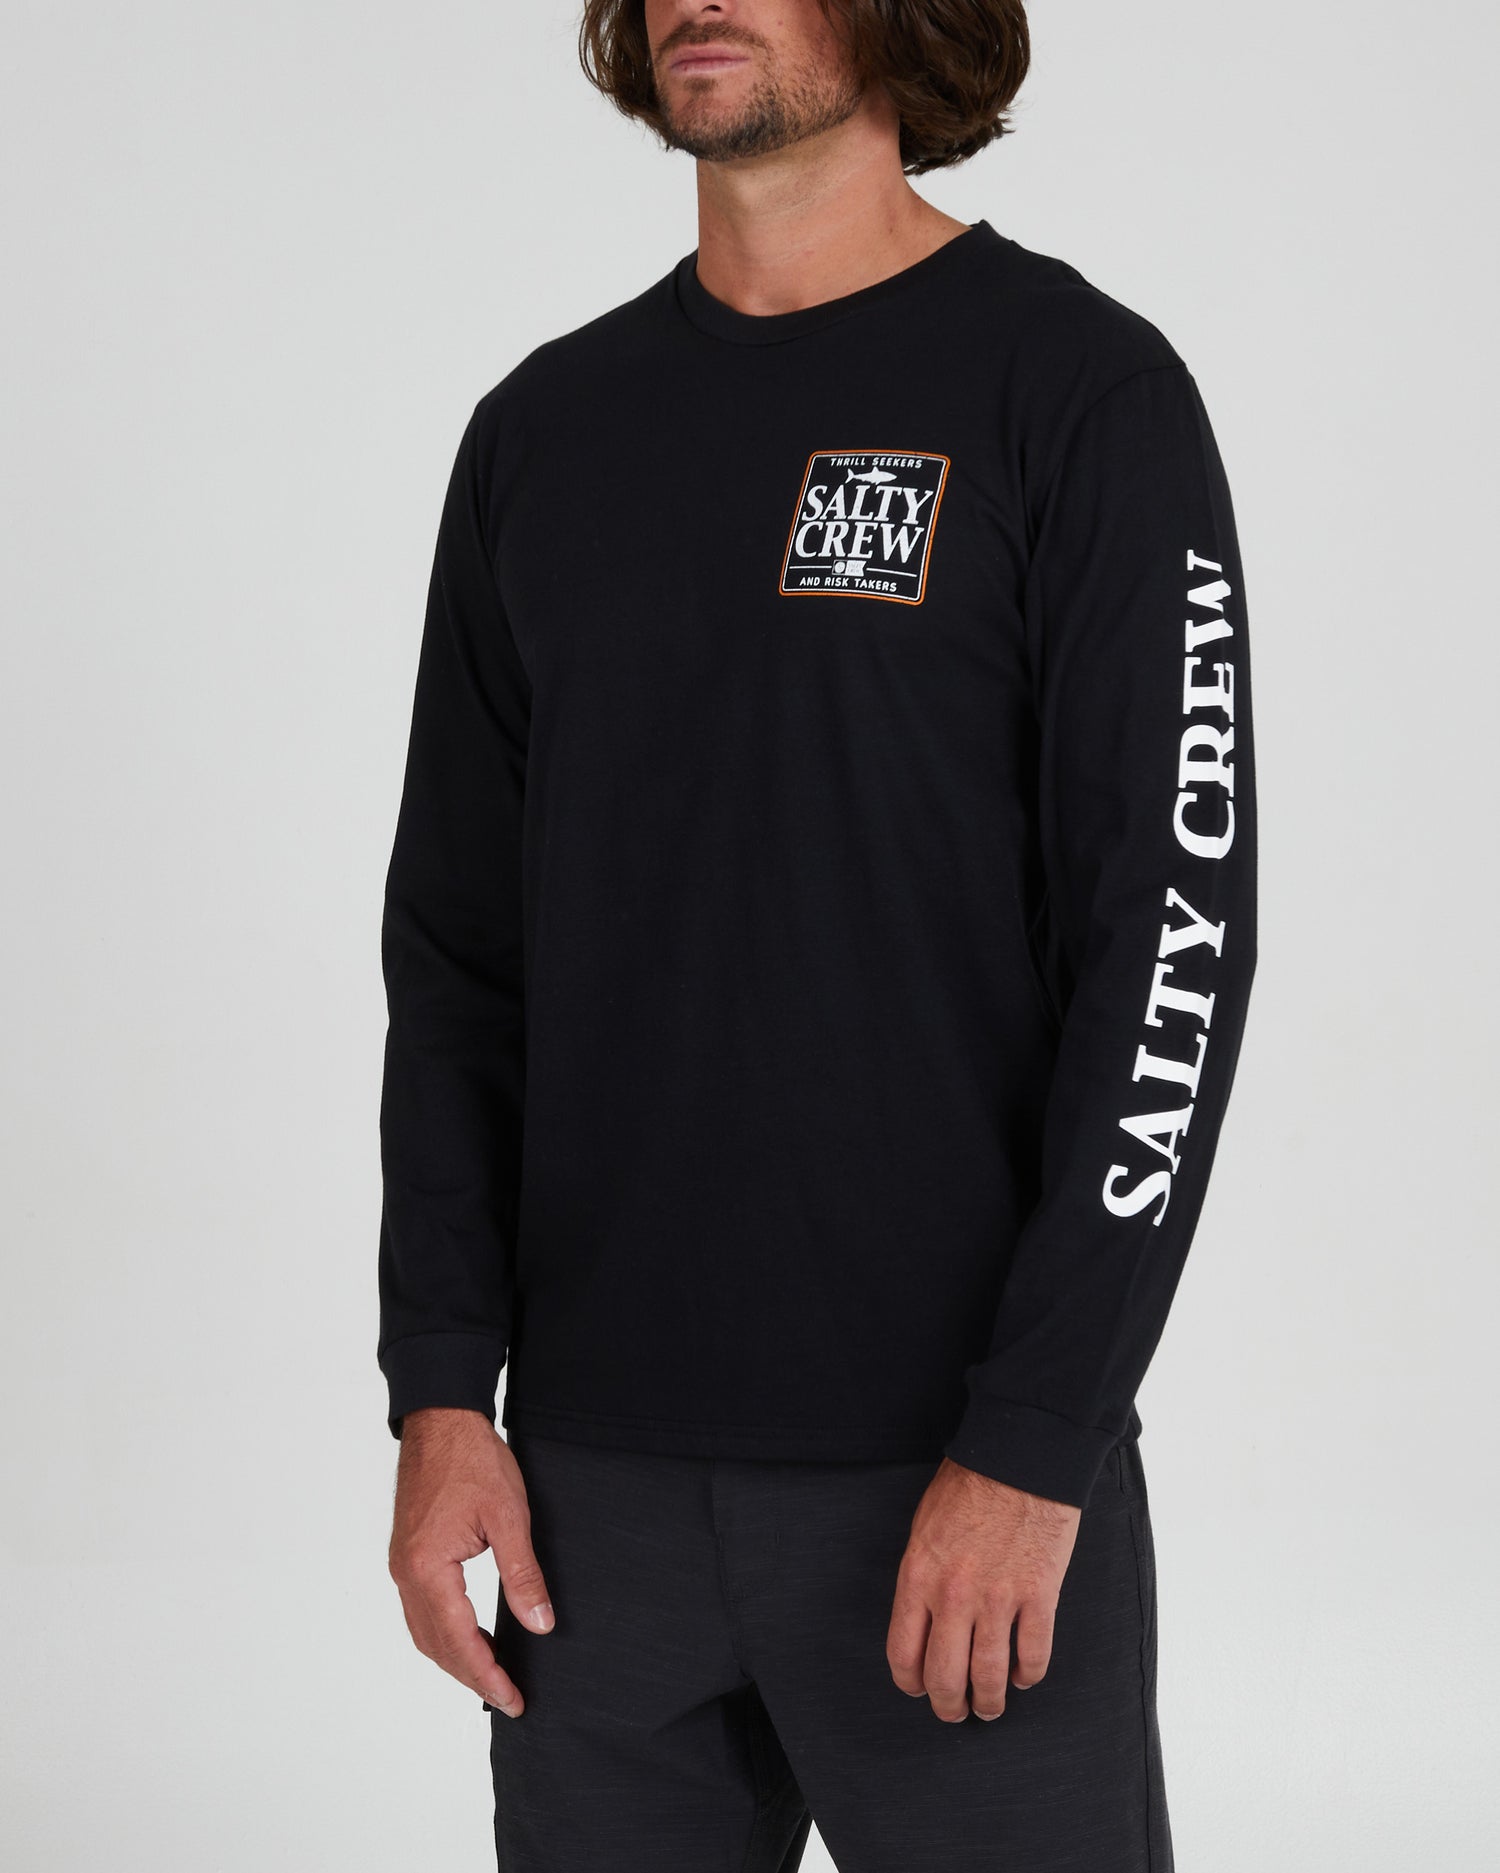 On body front angle of the Coaster Black L/S Premium Tee